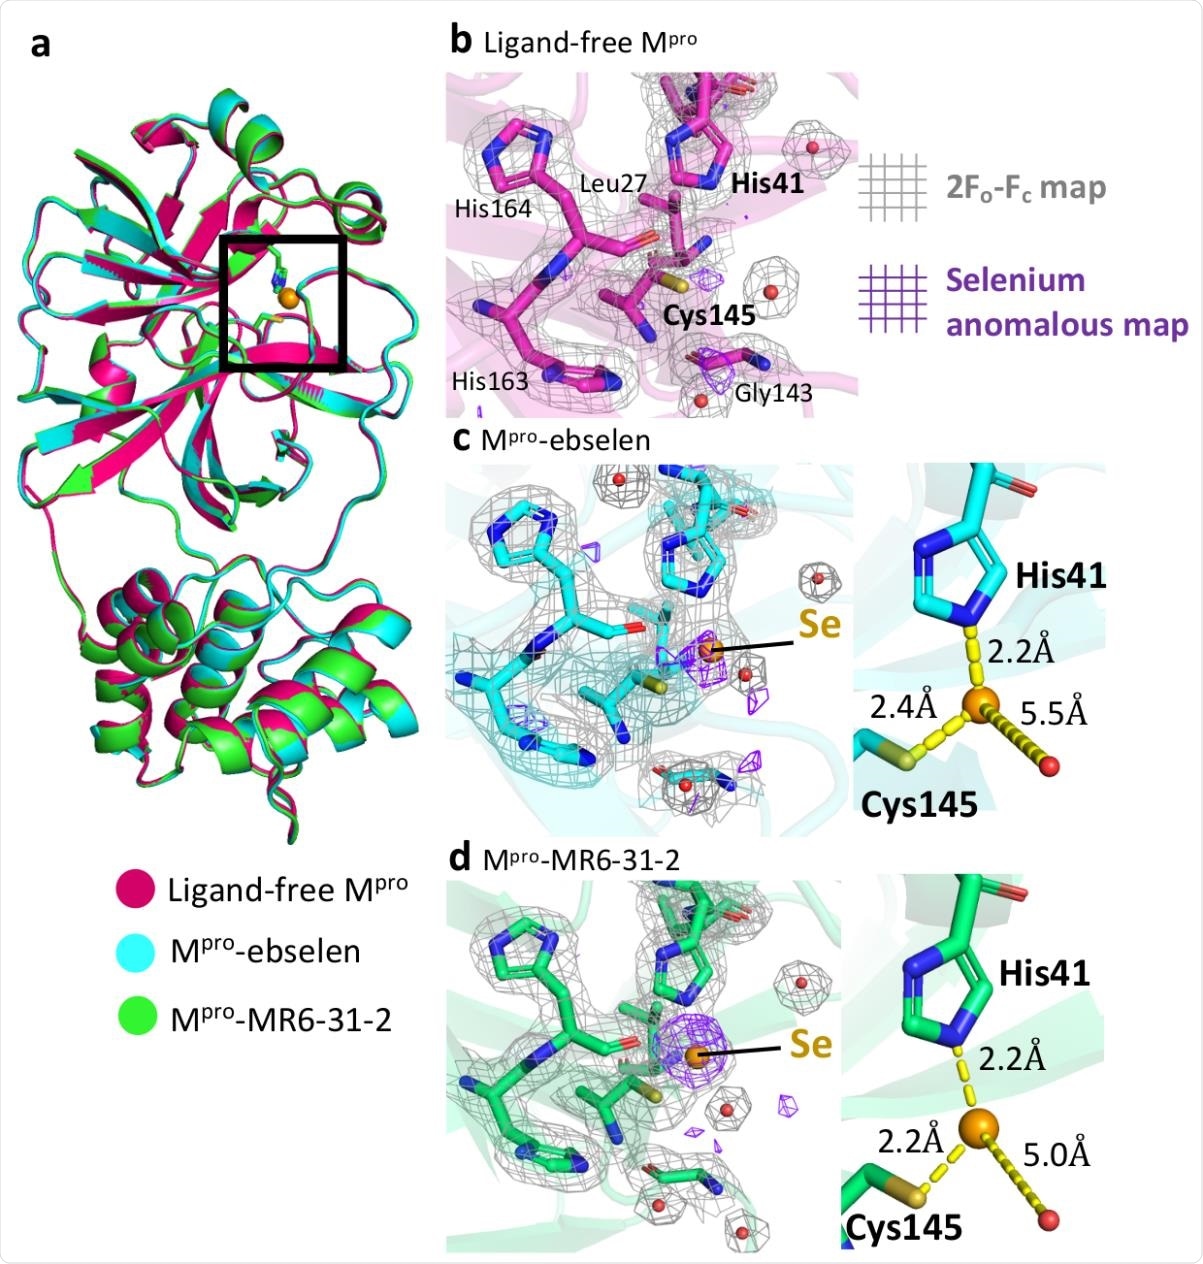 Crystallographic structures of ligand-free Mpro and the complexes with ebselen and MR6-31-2. a, Cartoon representation of superimposed structures of ligand-free Mpro (magenta), Mpro-ebselen (cyan) and Mpro-MR6-31-2 (green). The Mpro catalytic site is highlighted in a black box. Close-up views of catalytic site of b, ligand-free Mpro, c, Mpro-ebselen, and d, Mpro-MR6-31-2. Electron density (2Fo-Fc) map is shown as grey mesh at 1. Anomalous signal of selenium is shown as purple mesh at 3. Selenium atom and waters are shown as orange and red spheres, respectively.